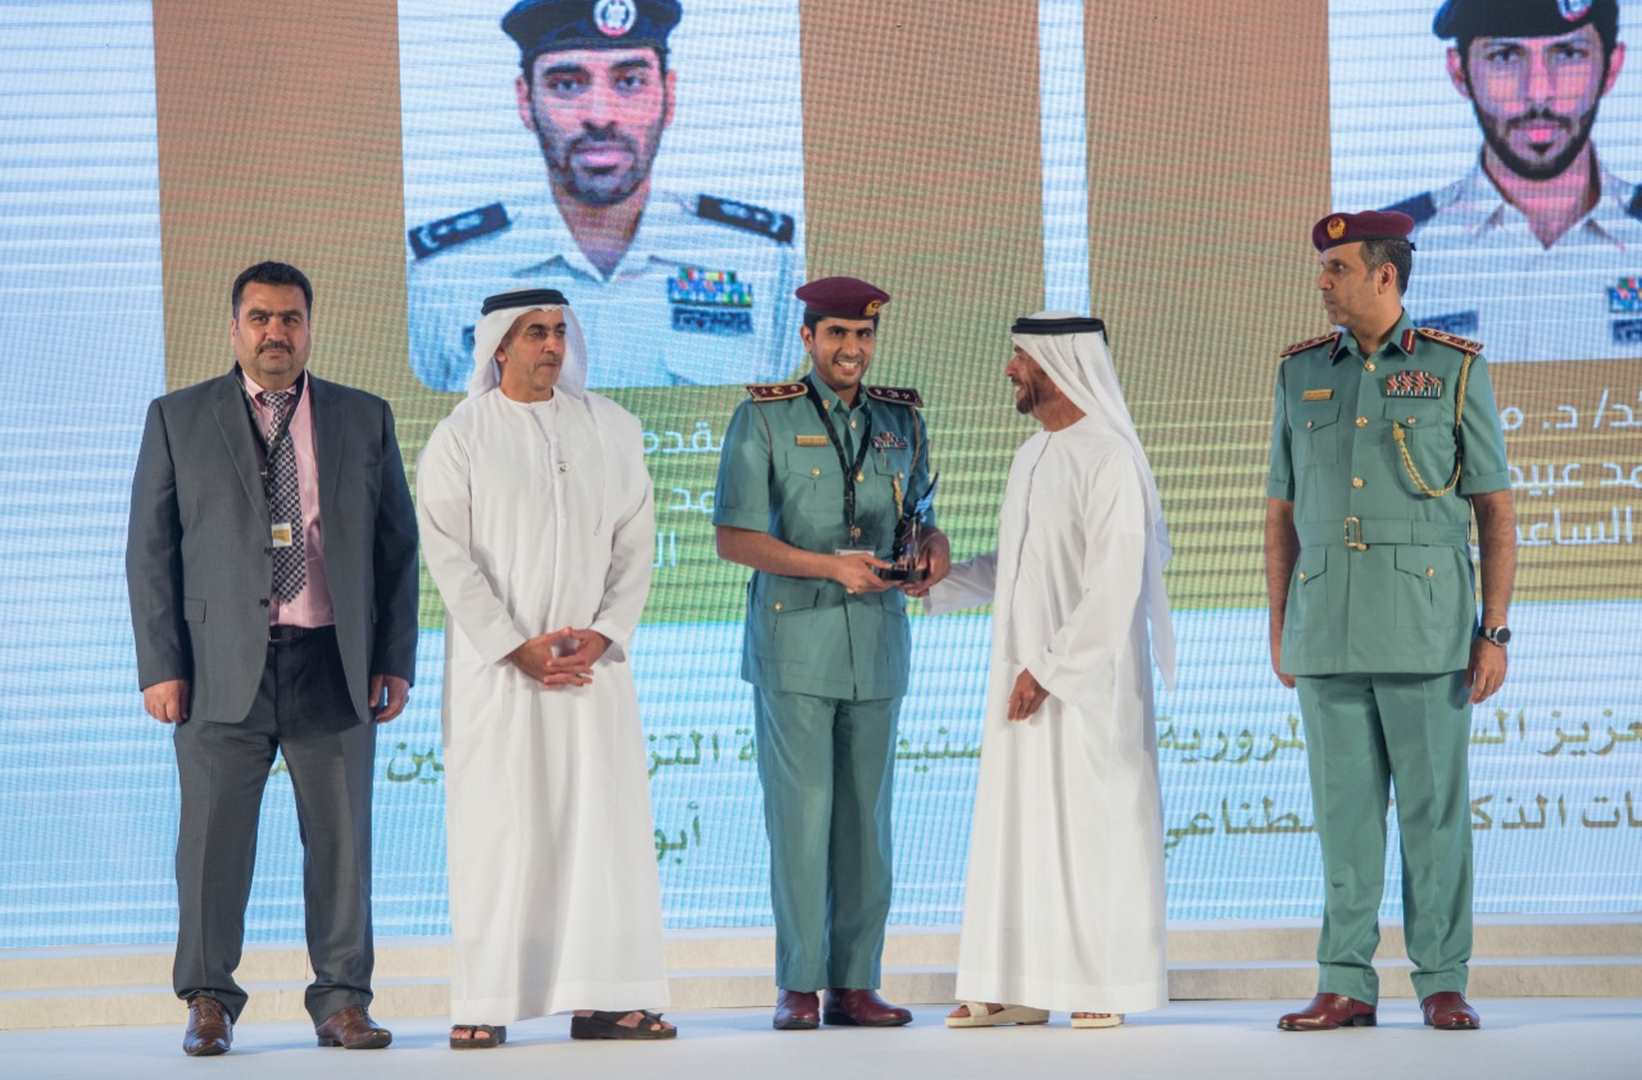 HONORS WINNERS OF THE 4TH MINISTER OF INTERIOR’S AWARD FOR SCIENTIFIC RESEARCH